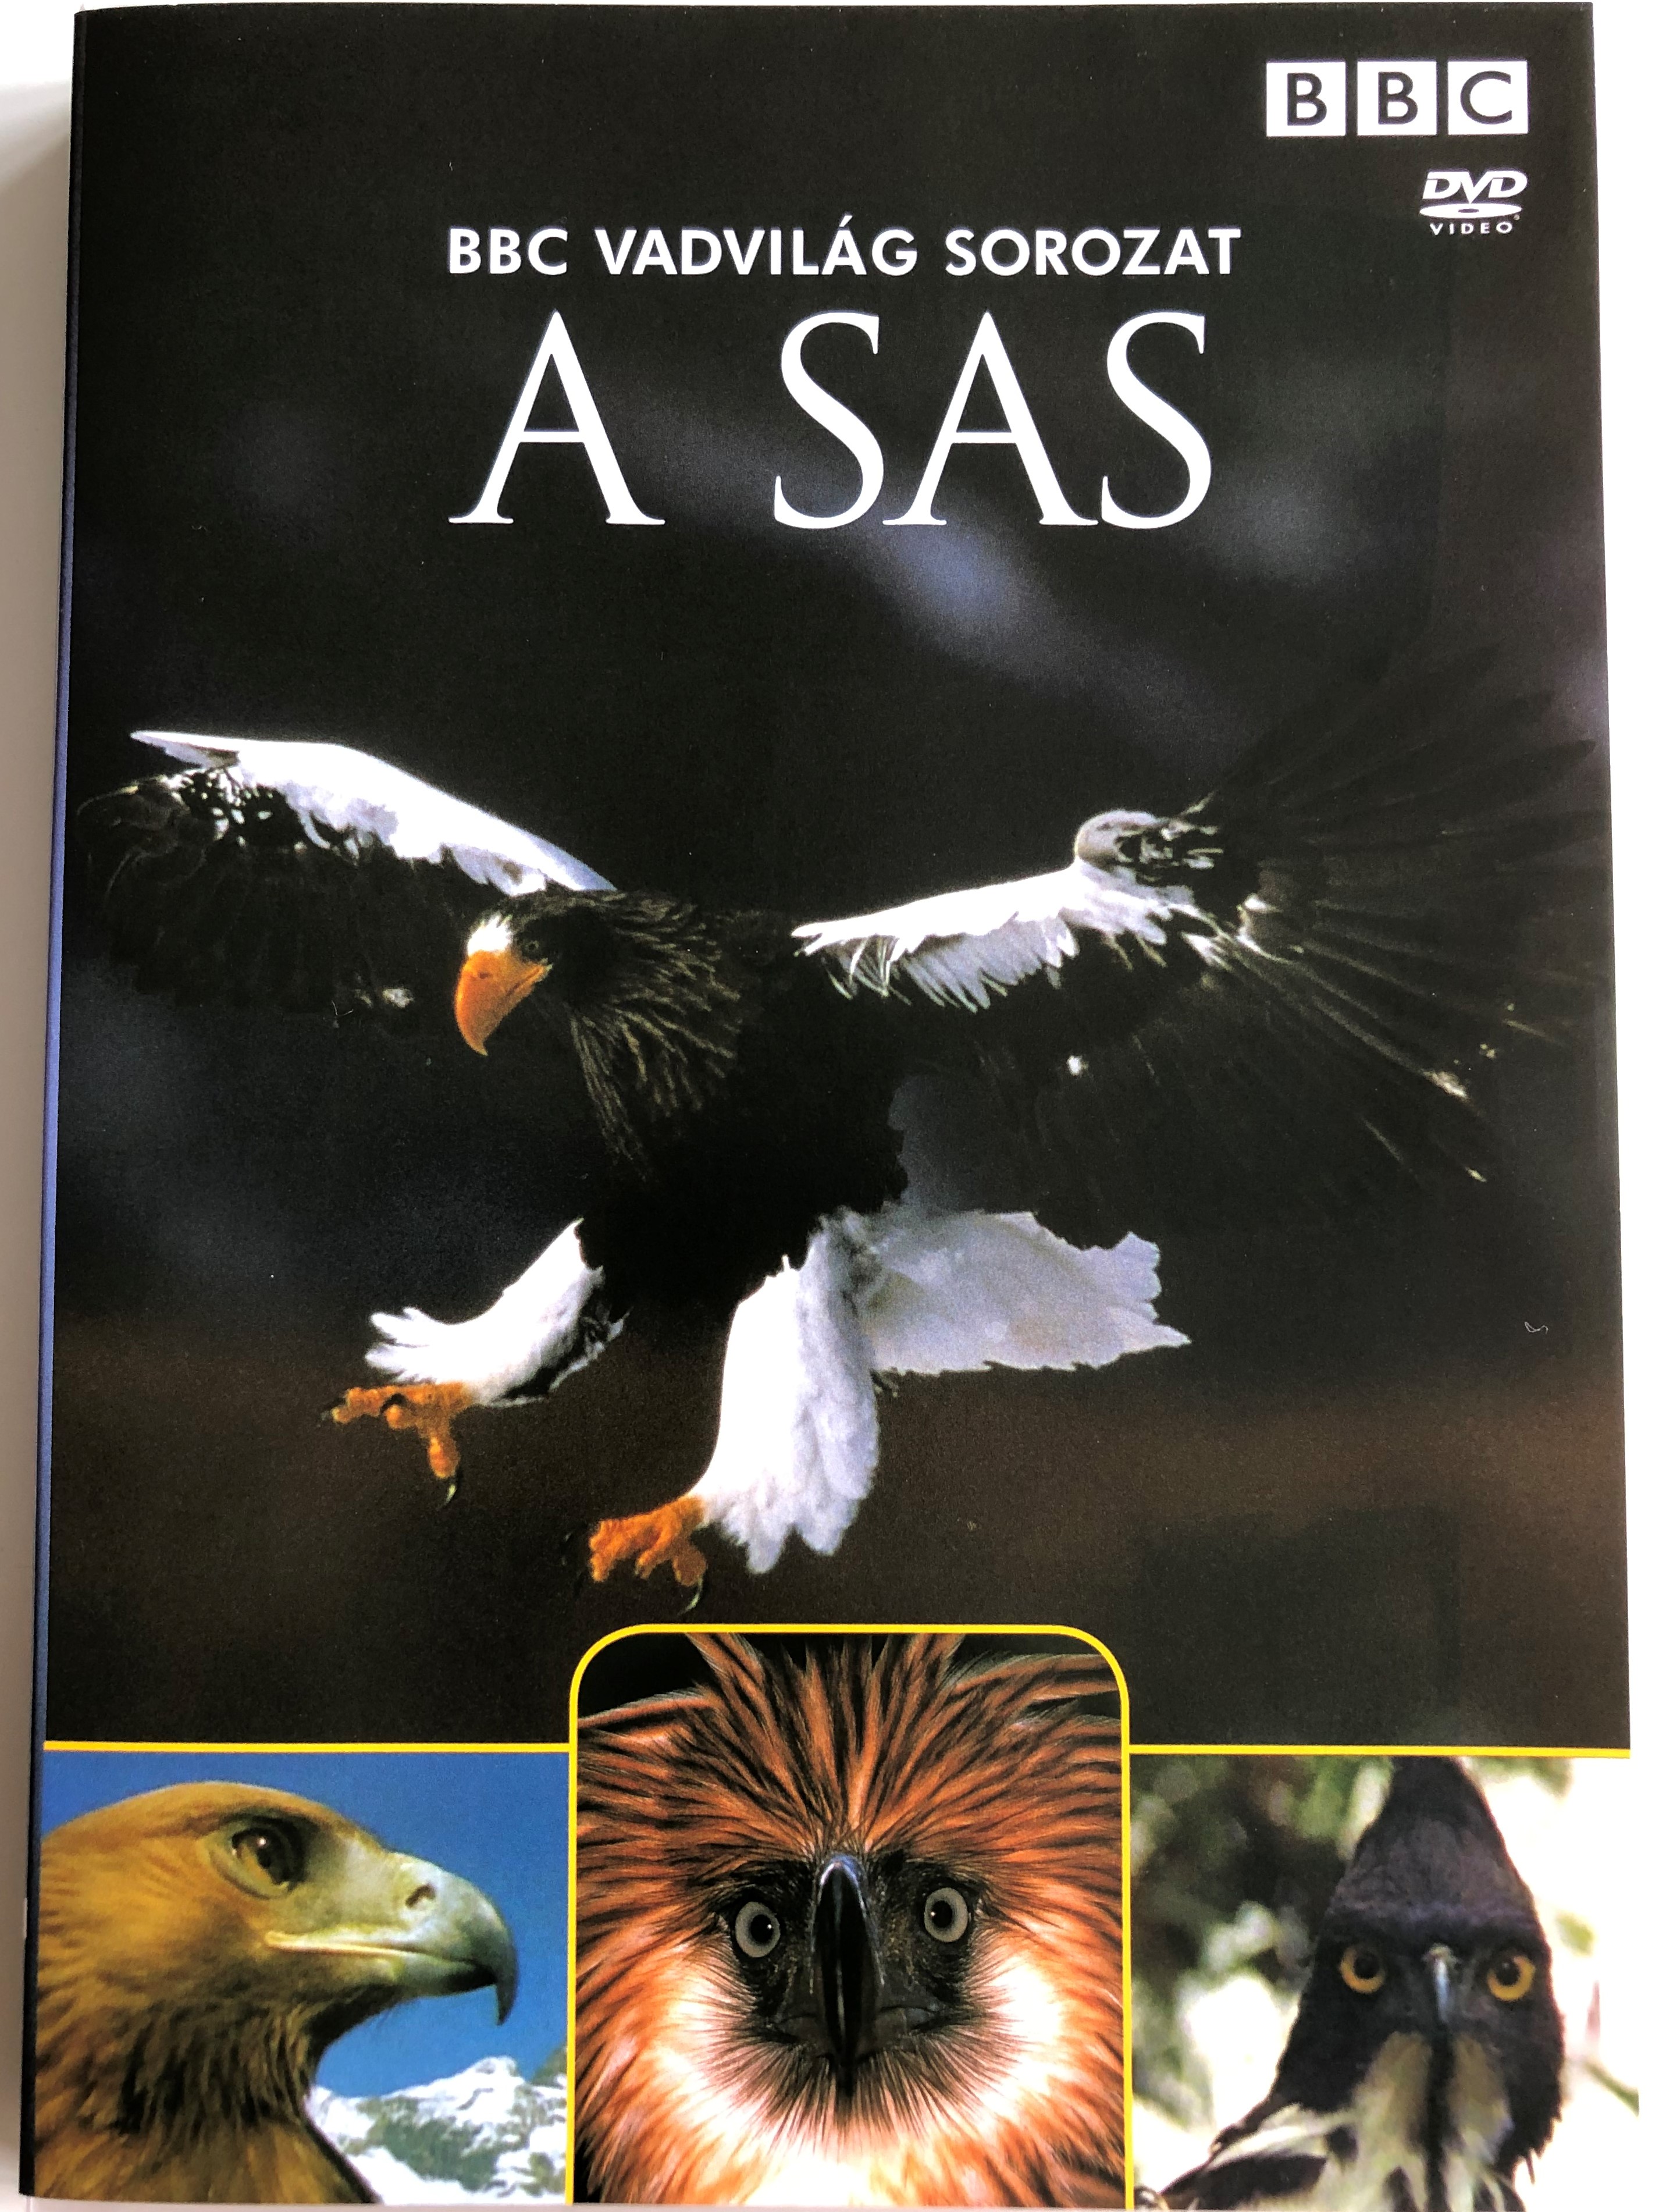 -the-eagle-master-of-the-skies-dvd-1996-a-sas-bbc-vadvil-g-sorozat-bbc-wildlife-series-narrated-by-sir-david-attenborough-directed-by-kate-de-pury-1-.jpg